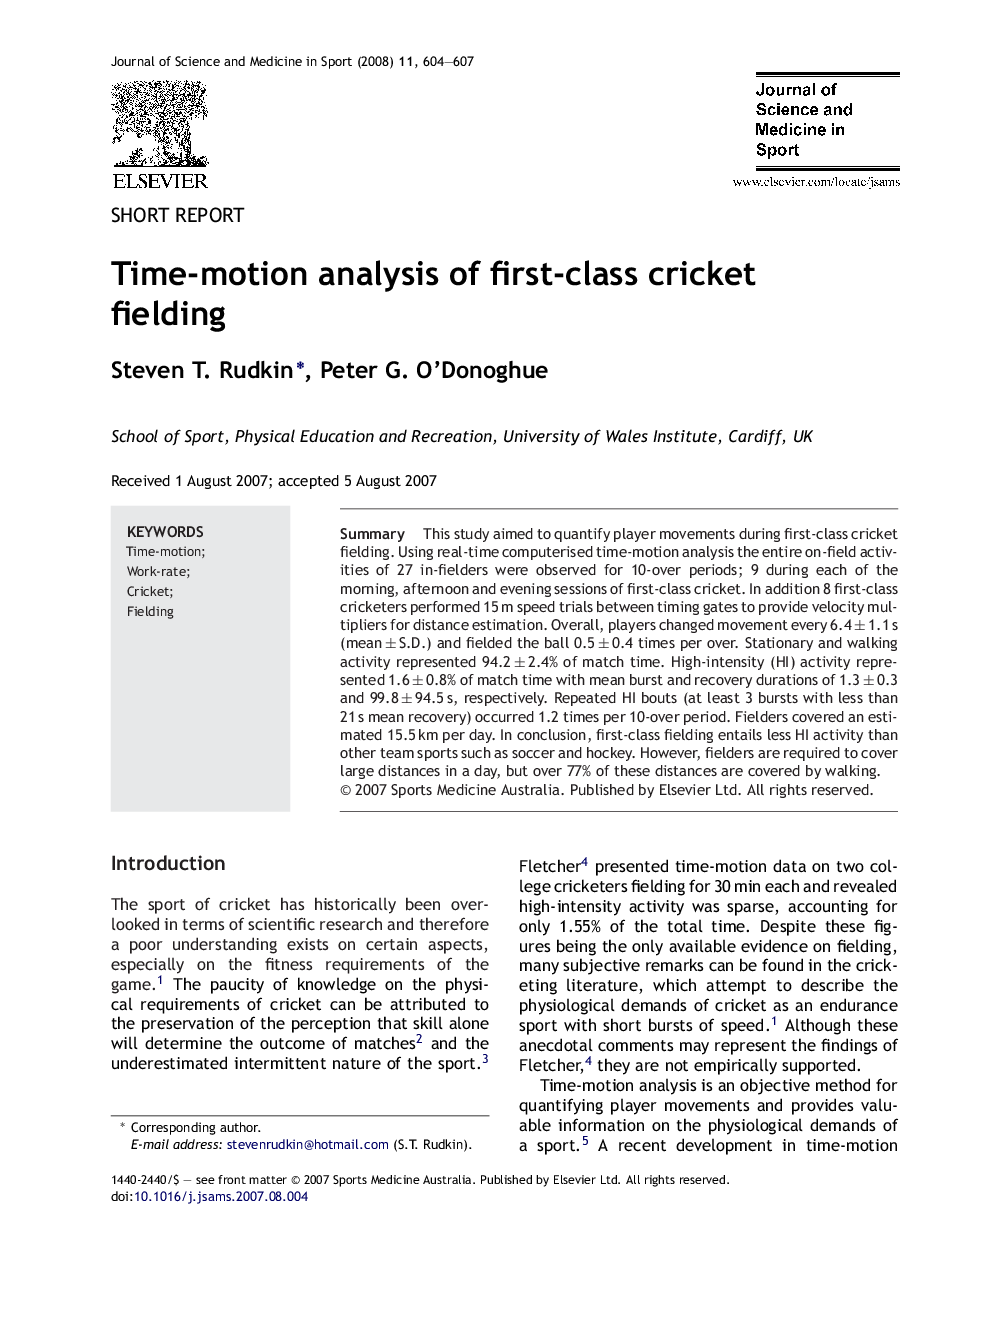 Time-motion analysis of first-class cricket fielding